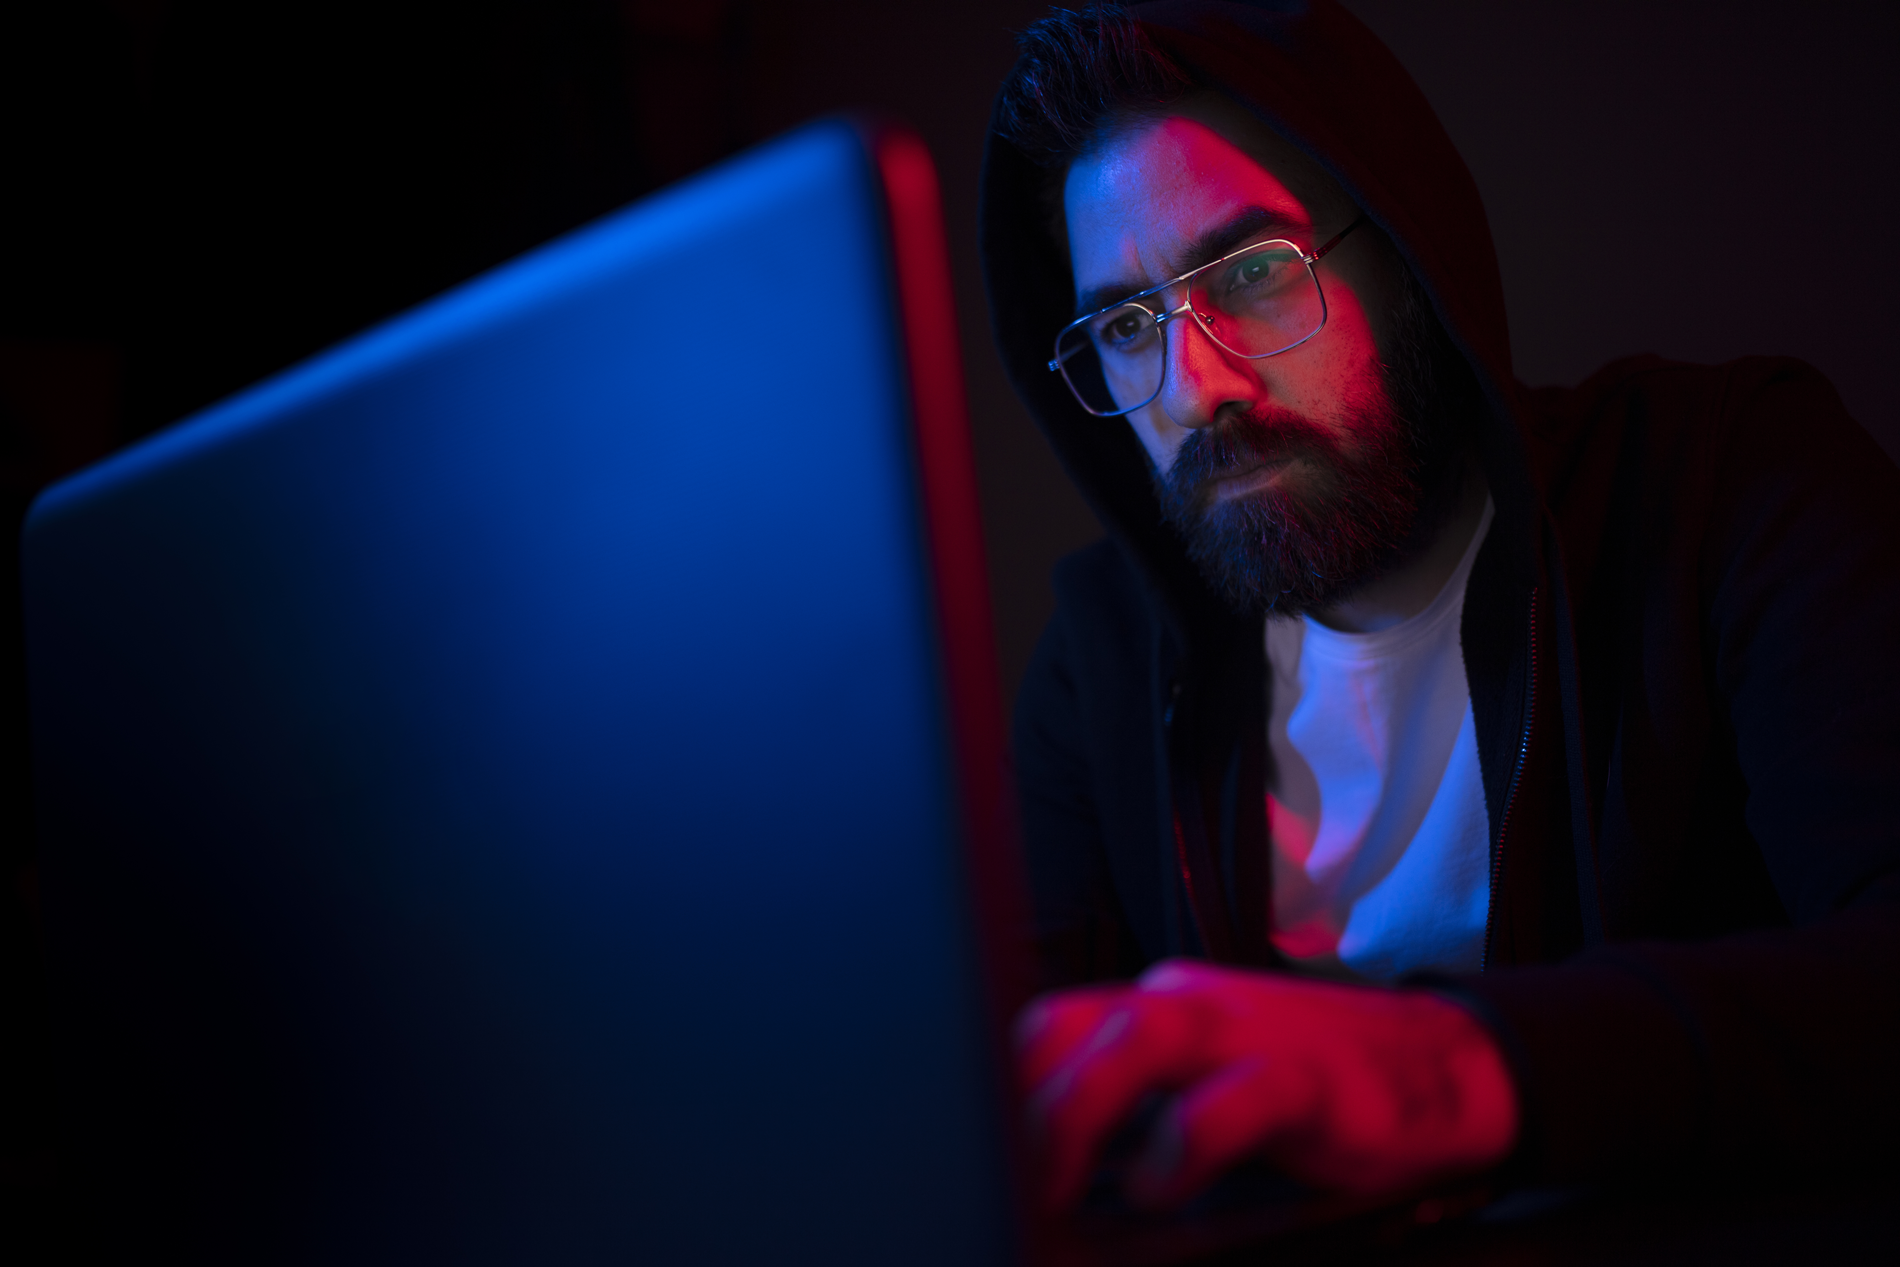 Man with facial beard and wearing eyeglasses and a black hoodie types on a laptop in a dark room.